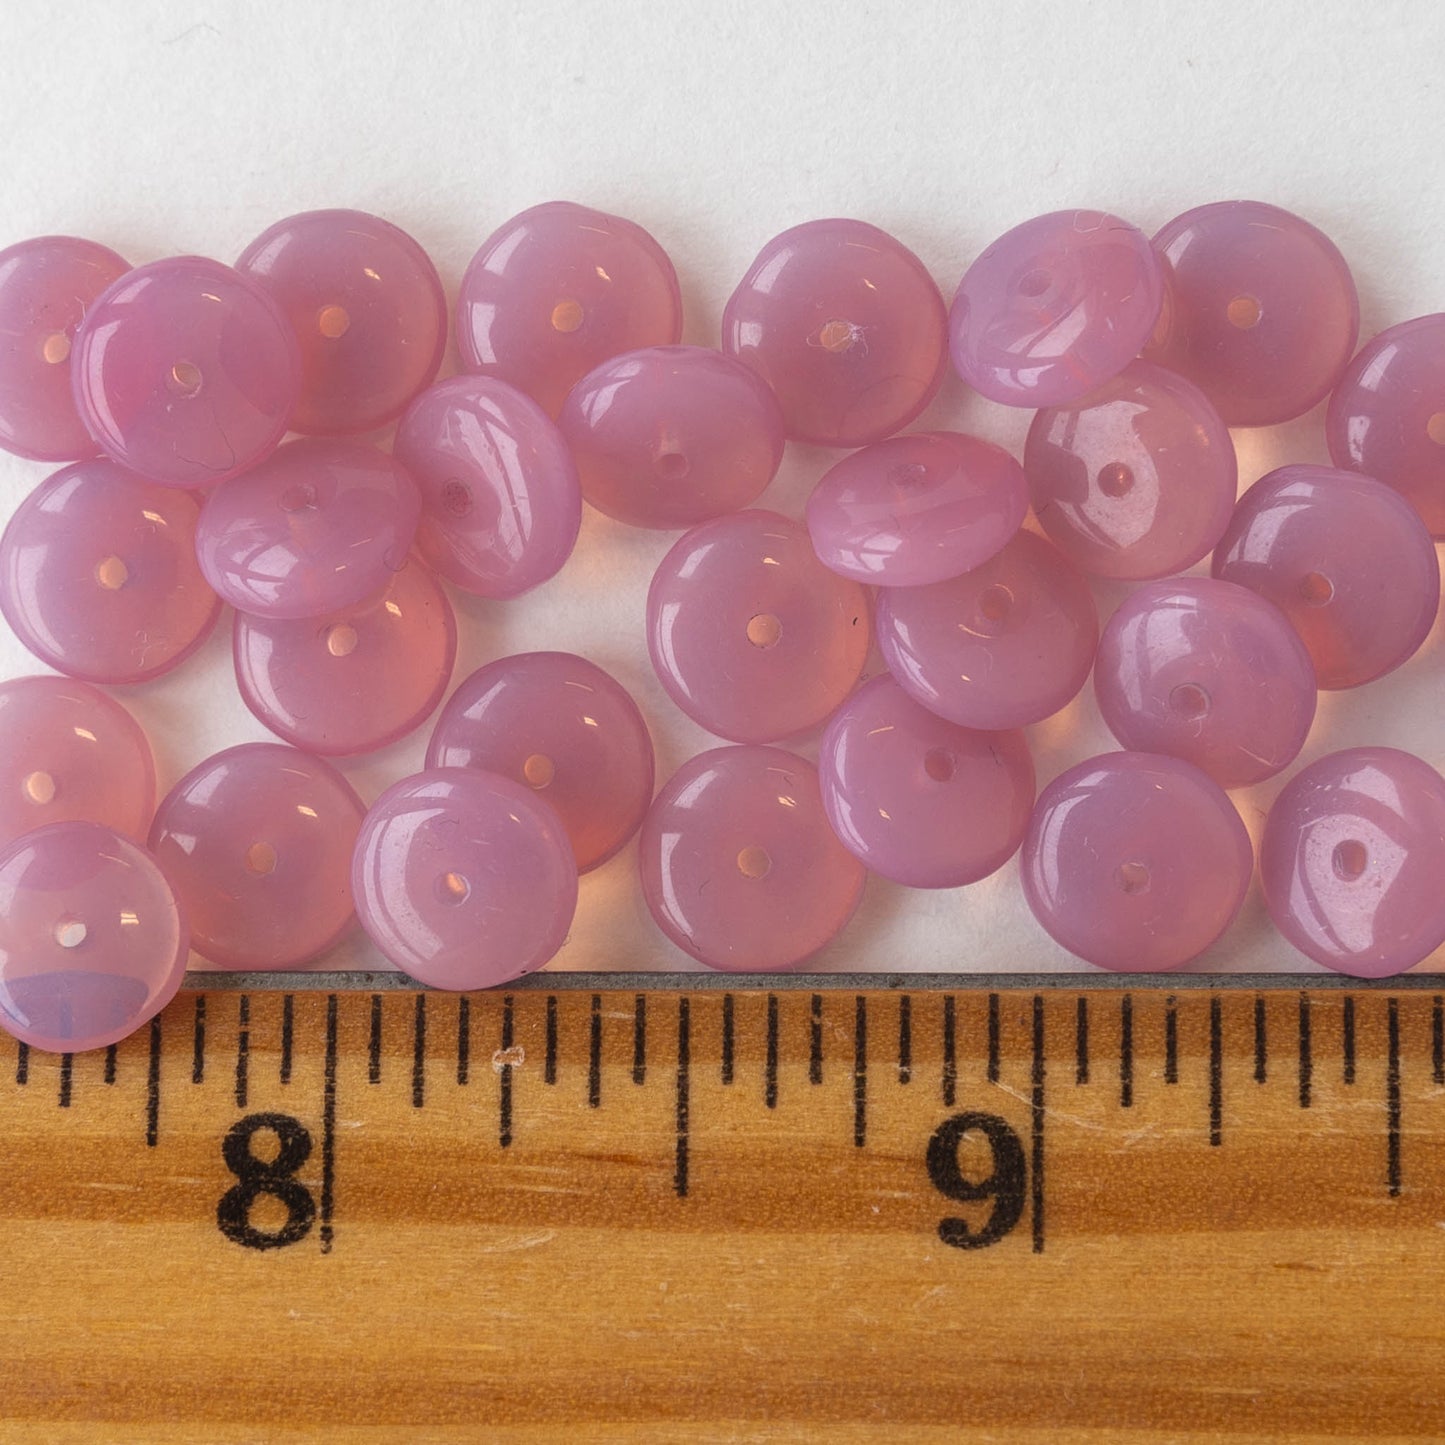 8mm Glass Rondelle Beads - Opaline Pink Rose - 30 Beads